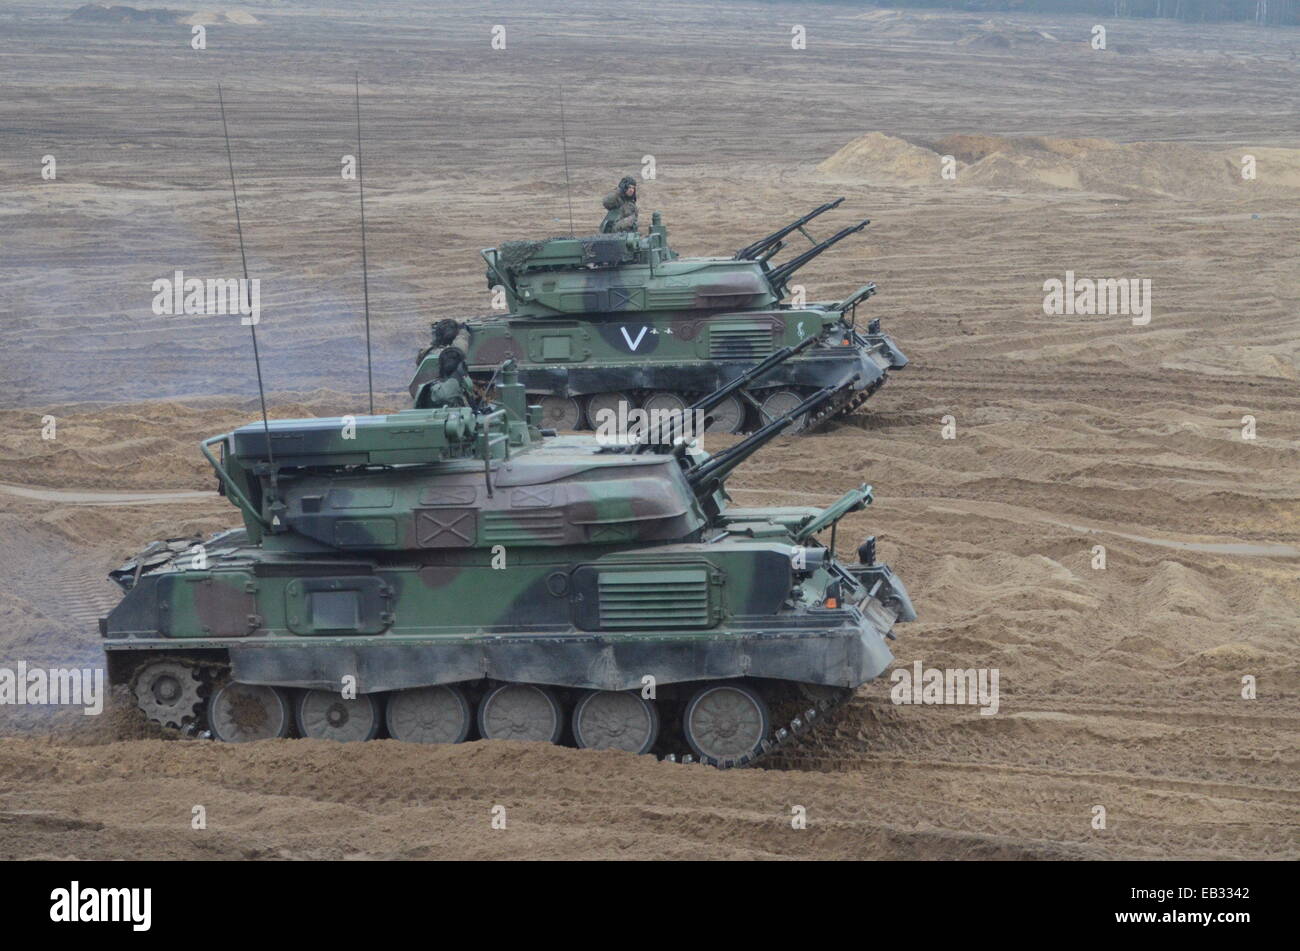 The ZSU-23-4 "Shilka" is a lightly armored, self-propelled, radar guided  anti-aircraft weapon system (SPAAG Stock Photo - Alamy